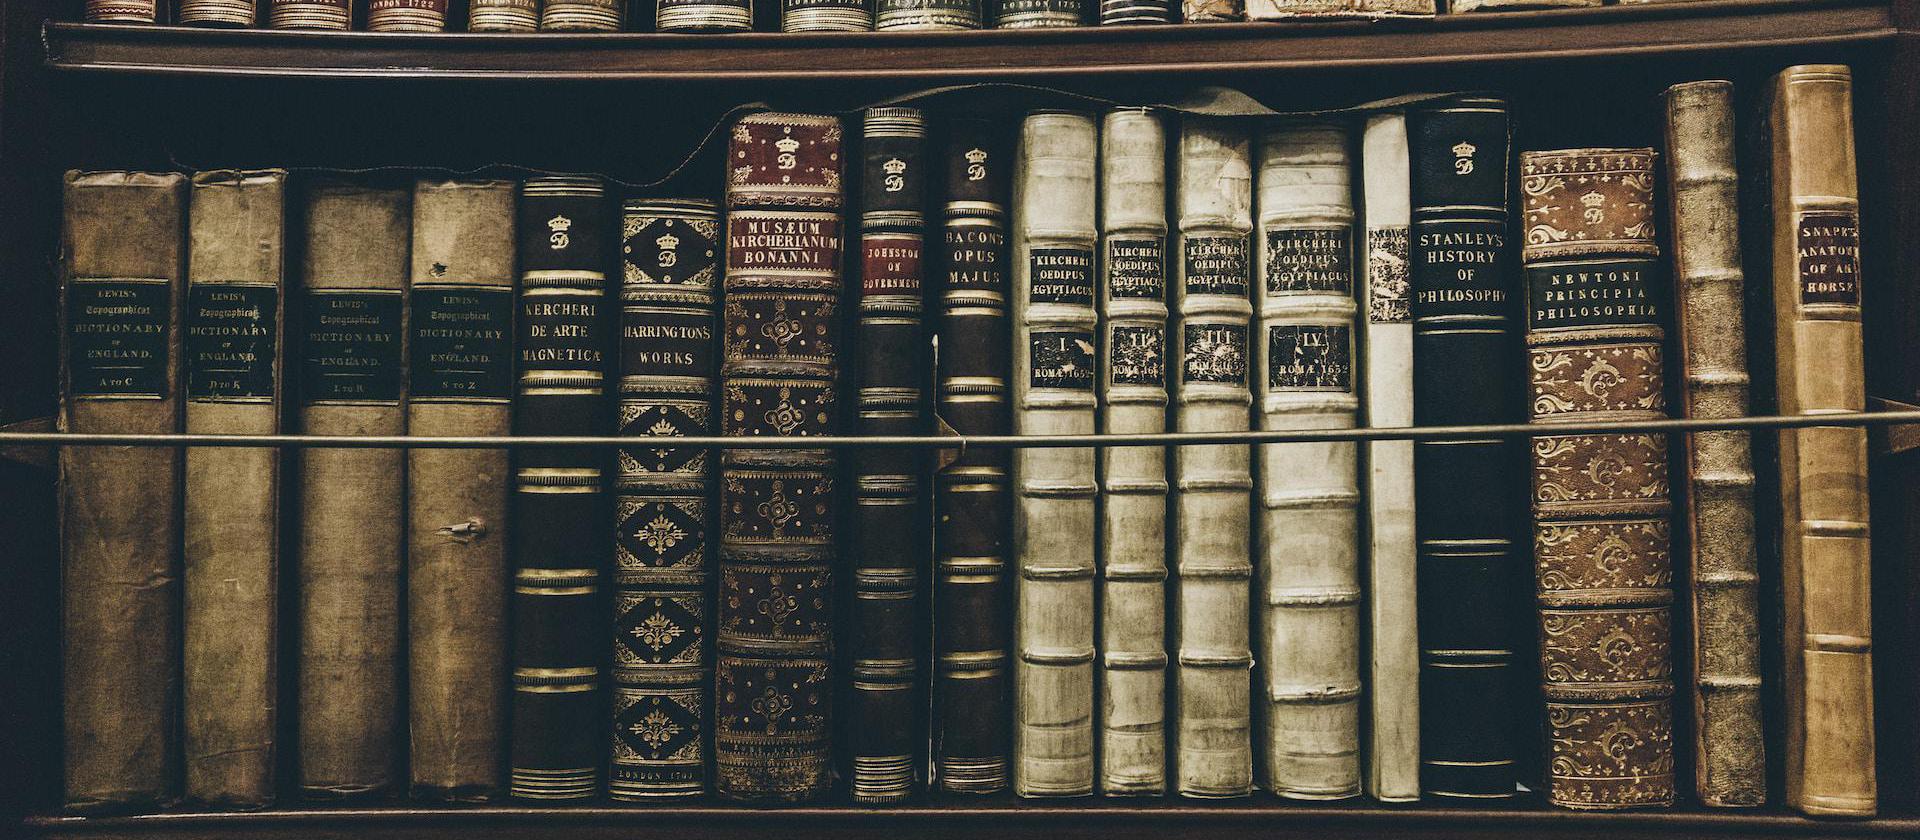 Image of old books on a bookcase shelf.